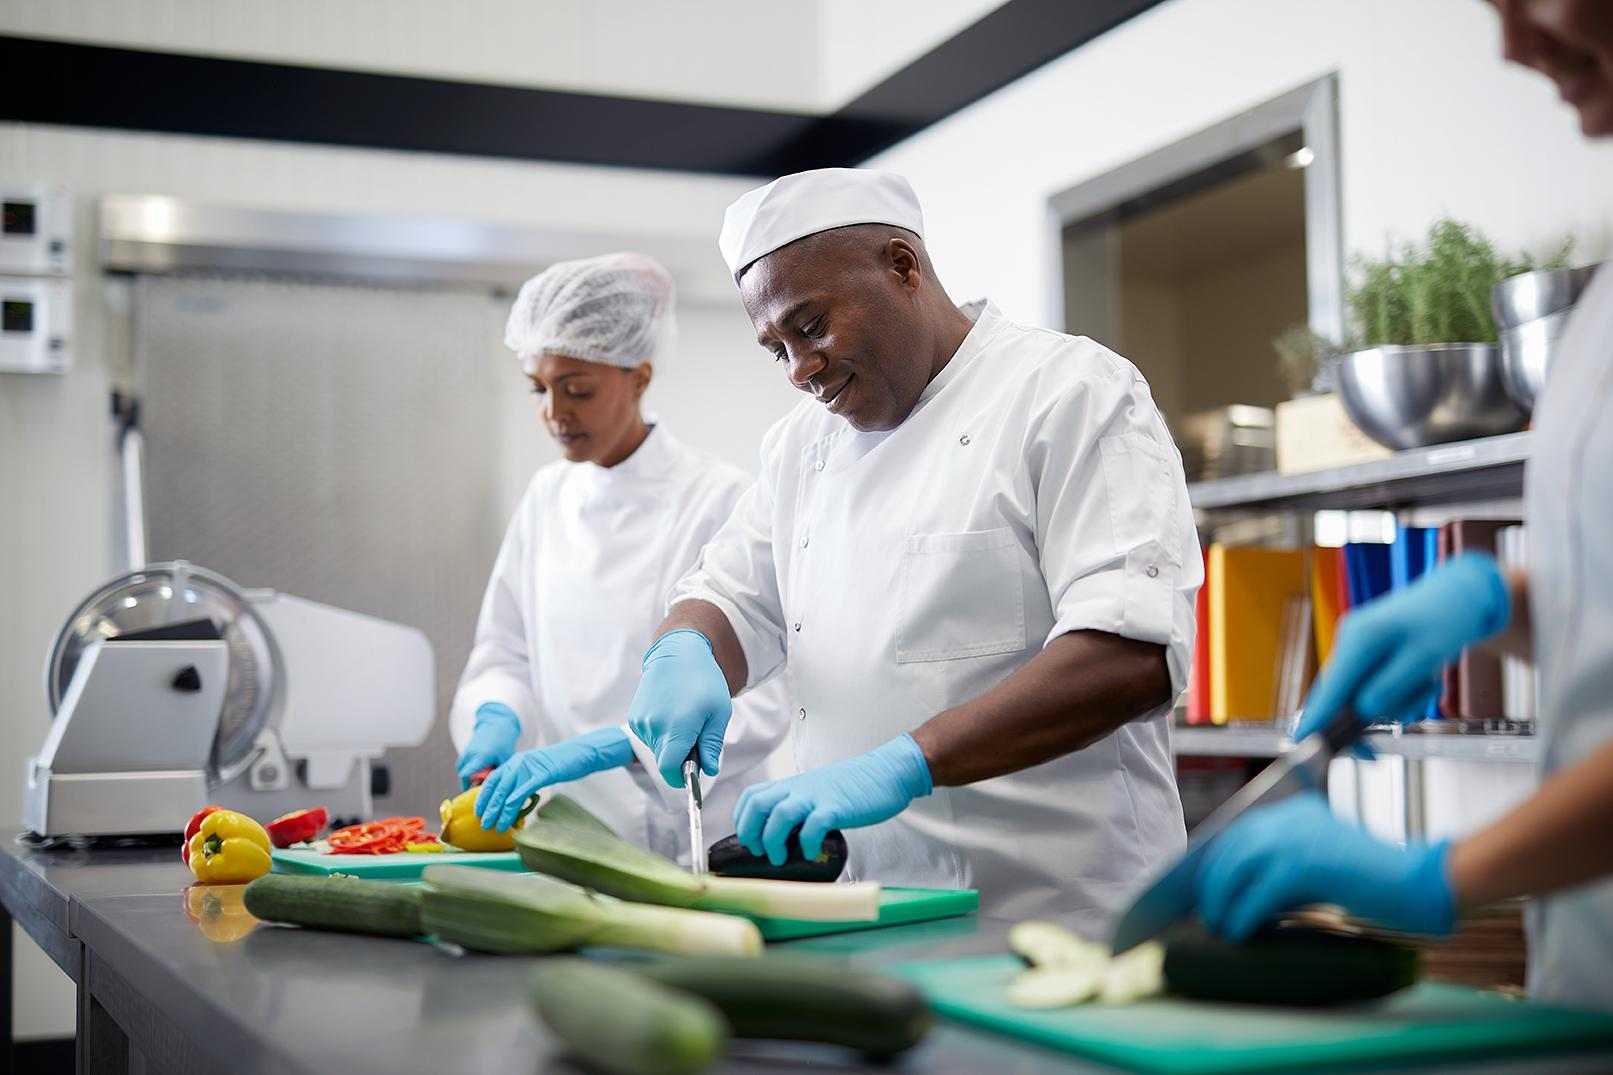 Good cleaning and hygiene promotes food safety